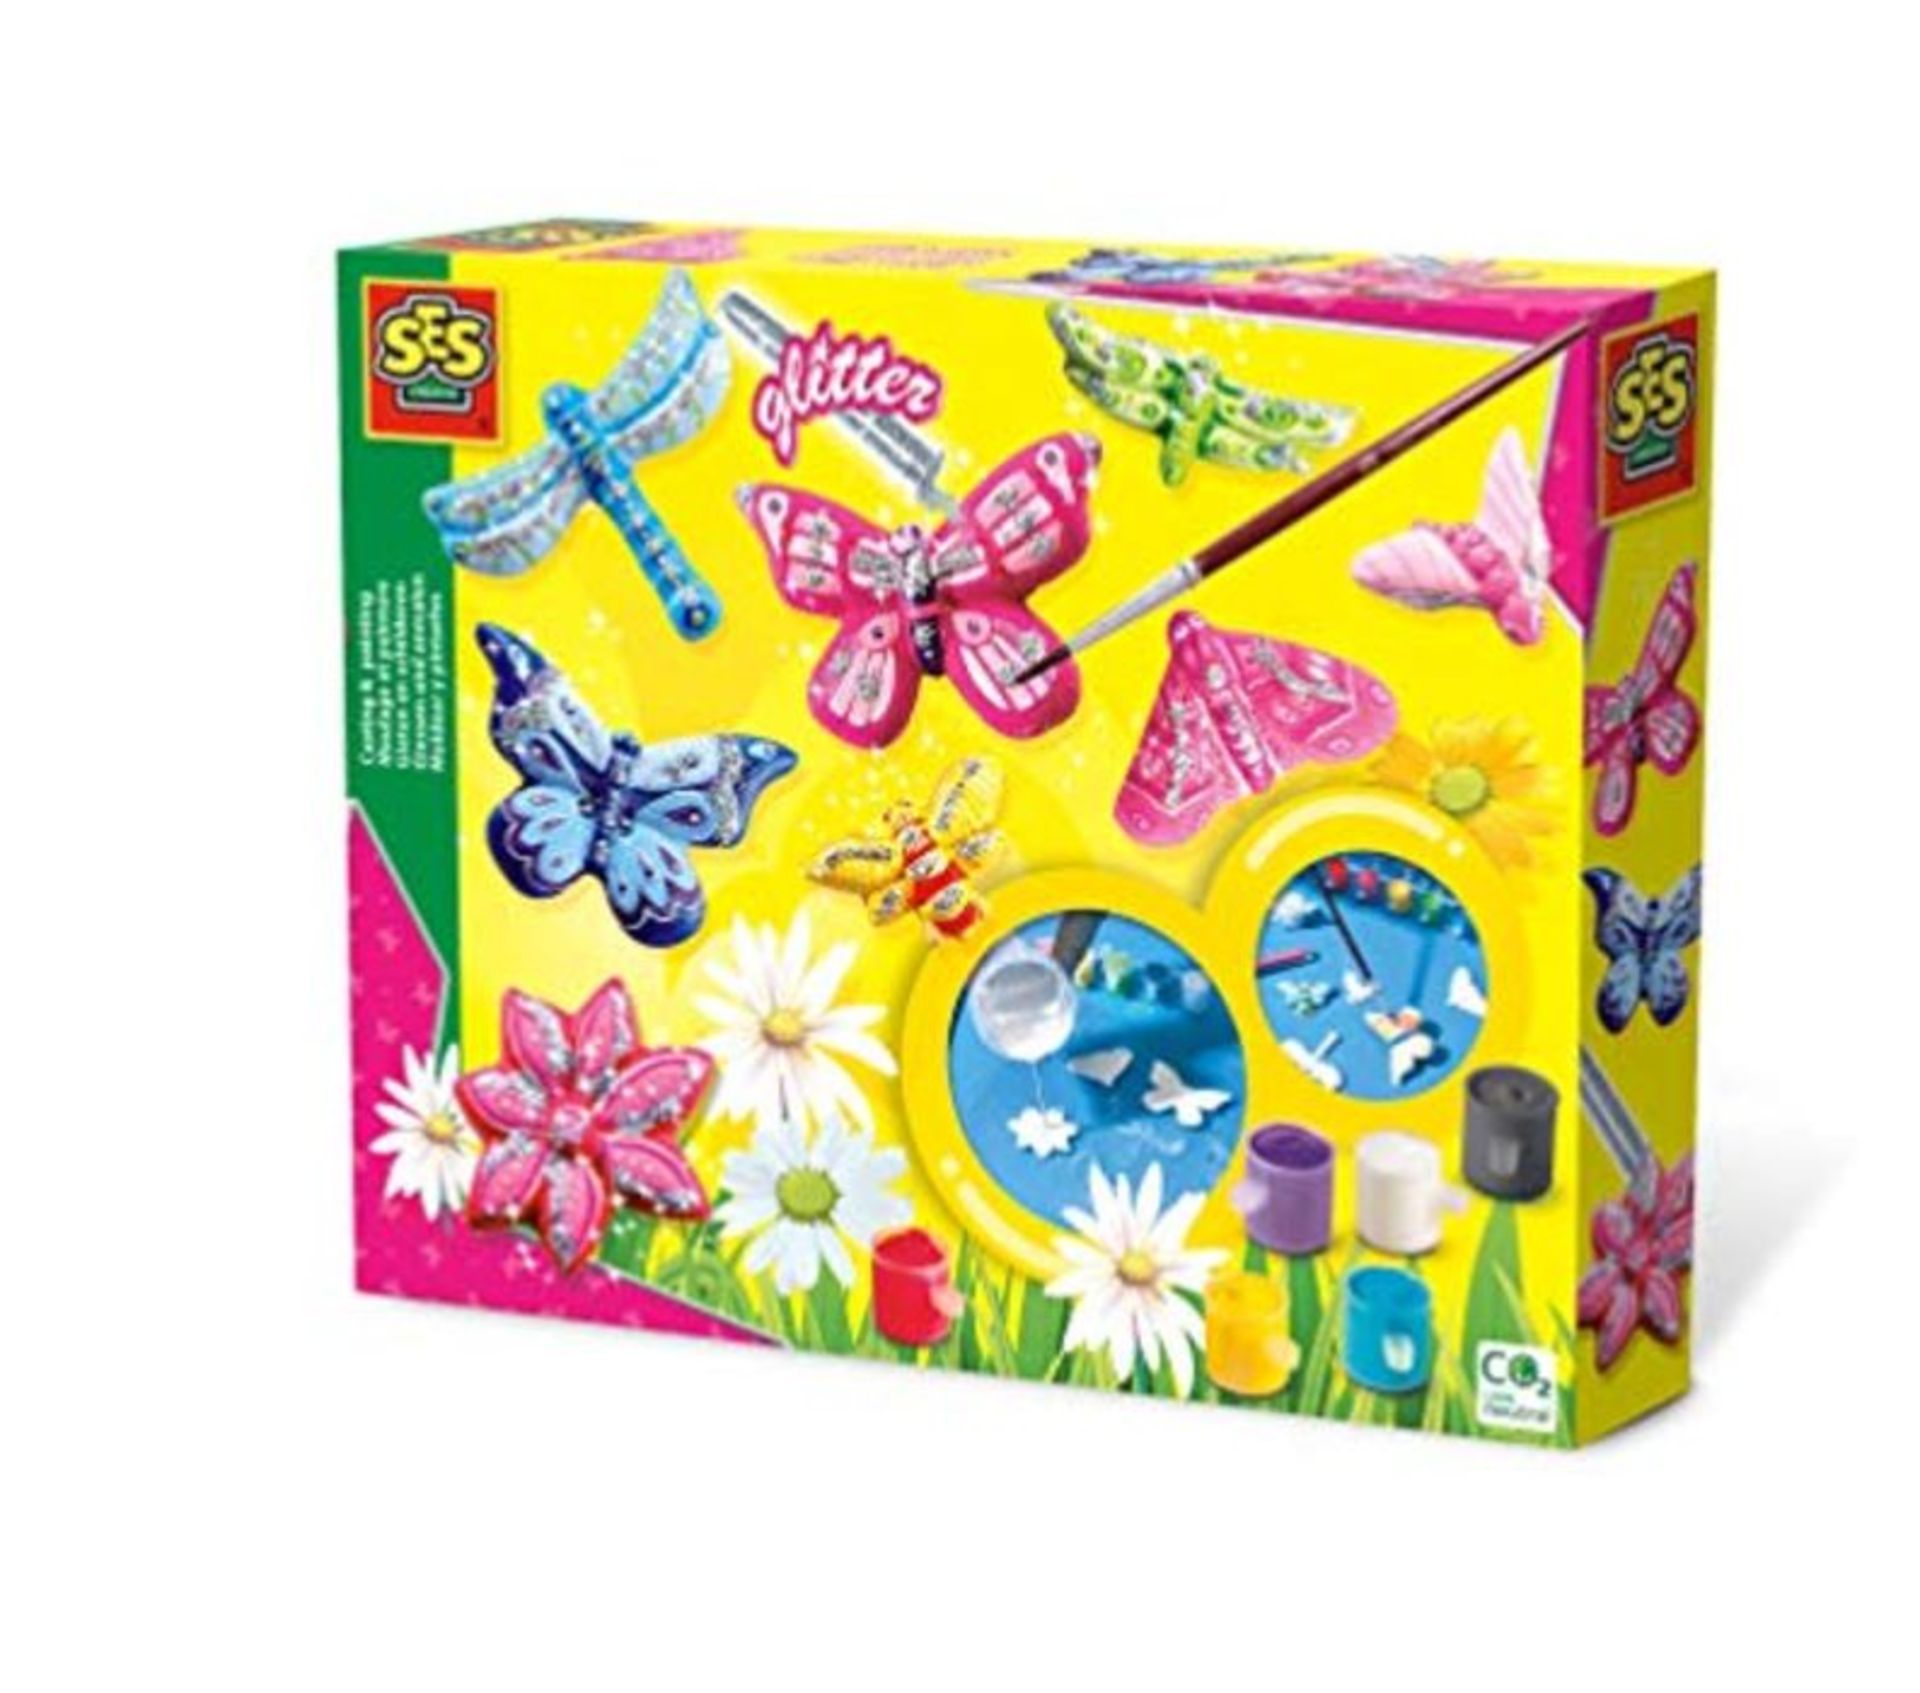 [INCOMPLETE] SES Creative 01131 Children's Butterfly Glitter Casting and Painting Set